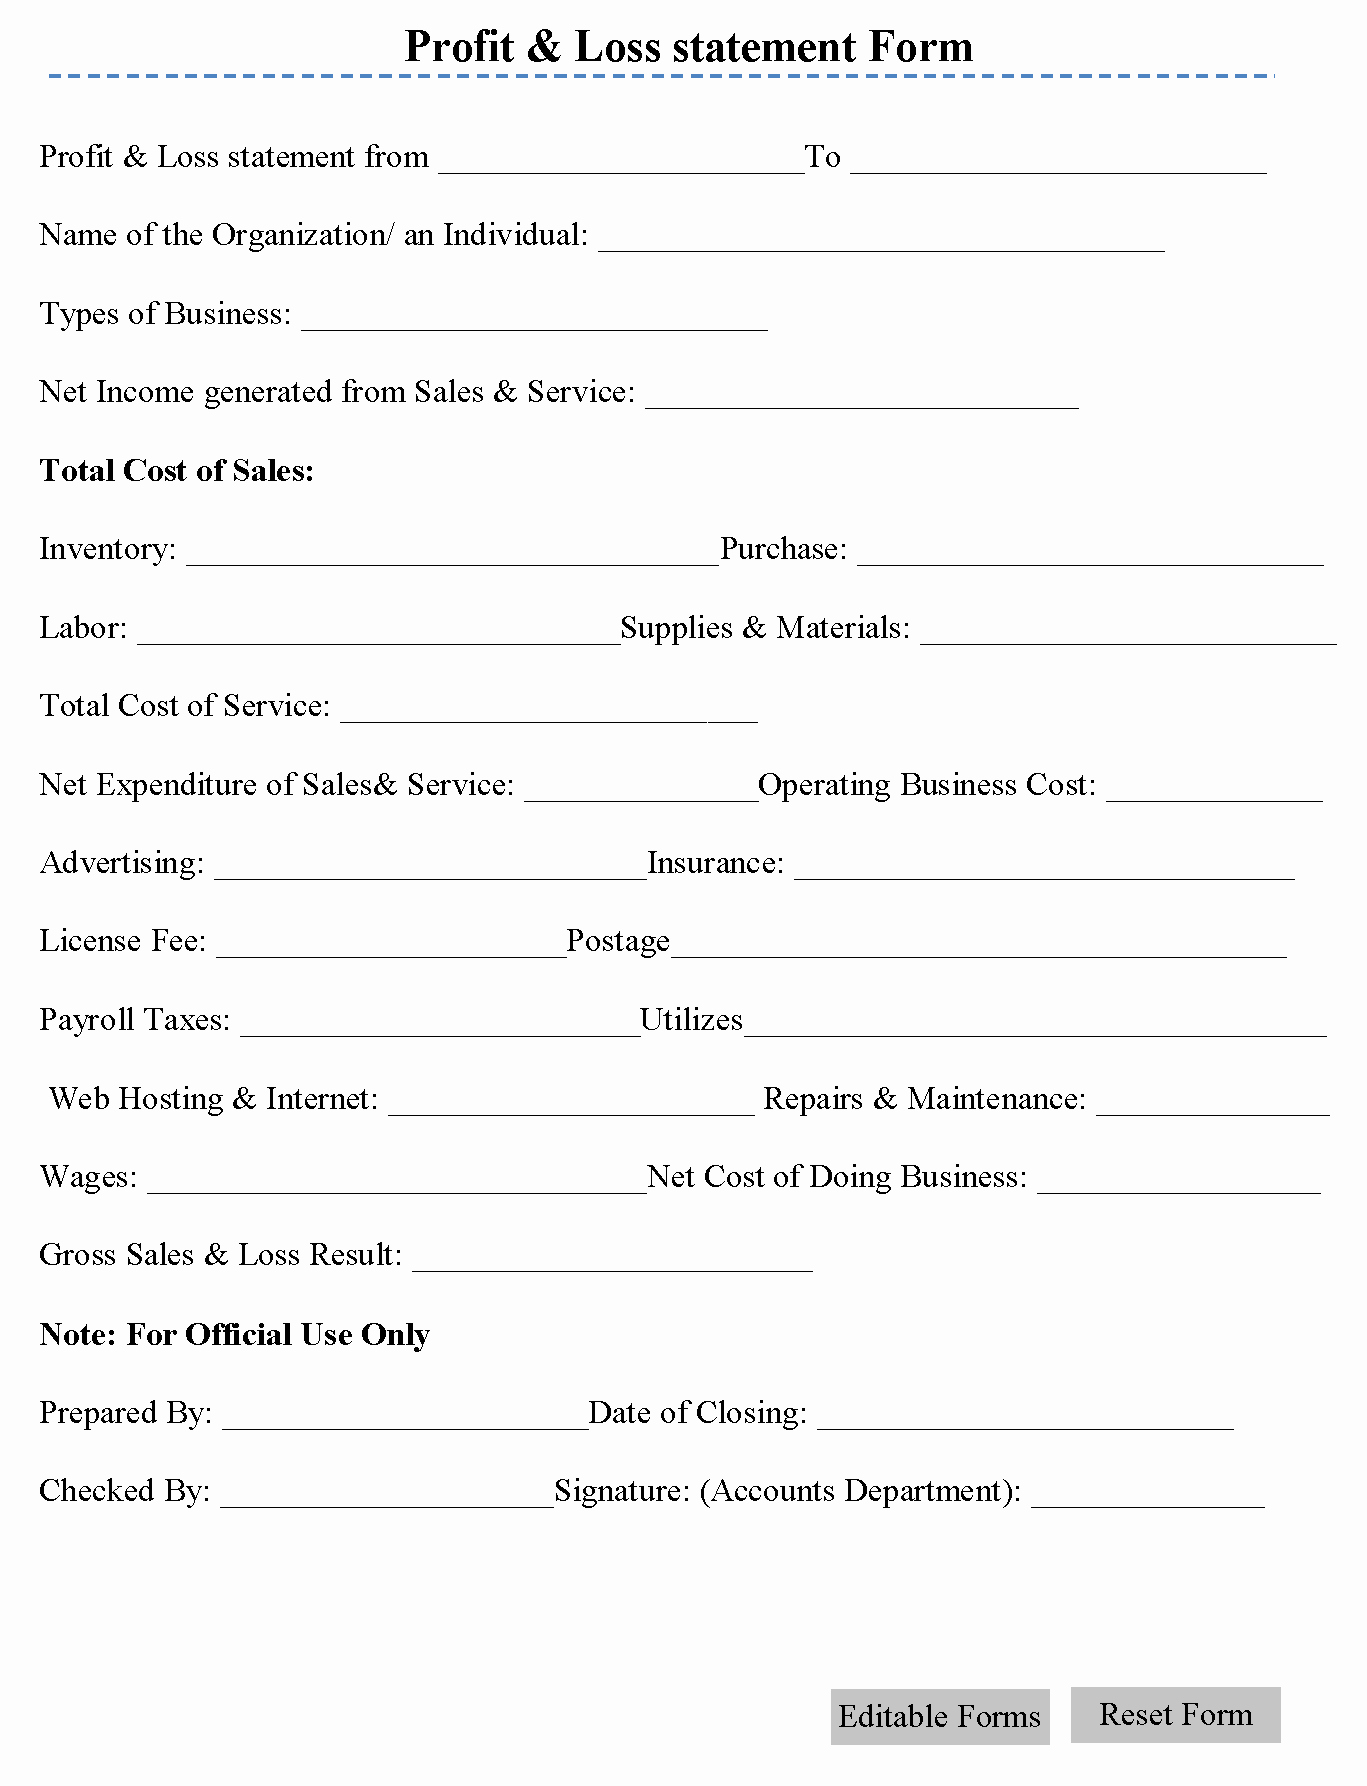 Loss and Profit forms Best Of Profit &amp; Loss Statement form